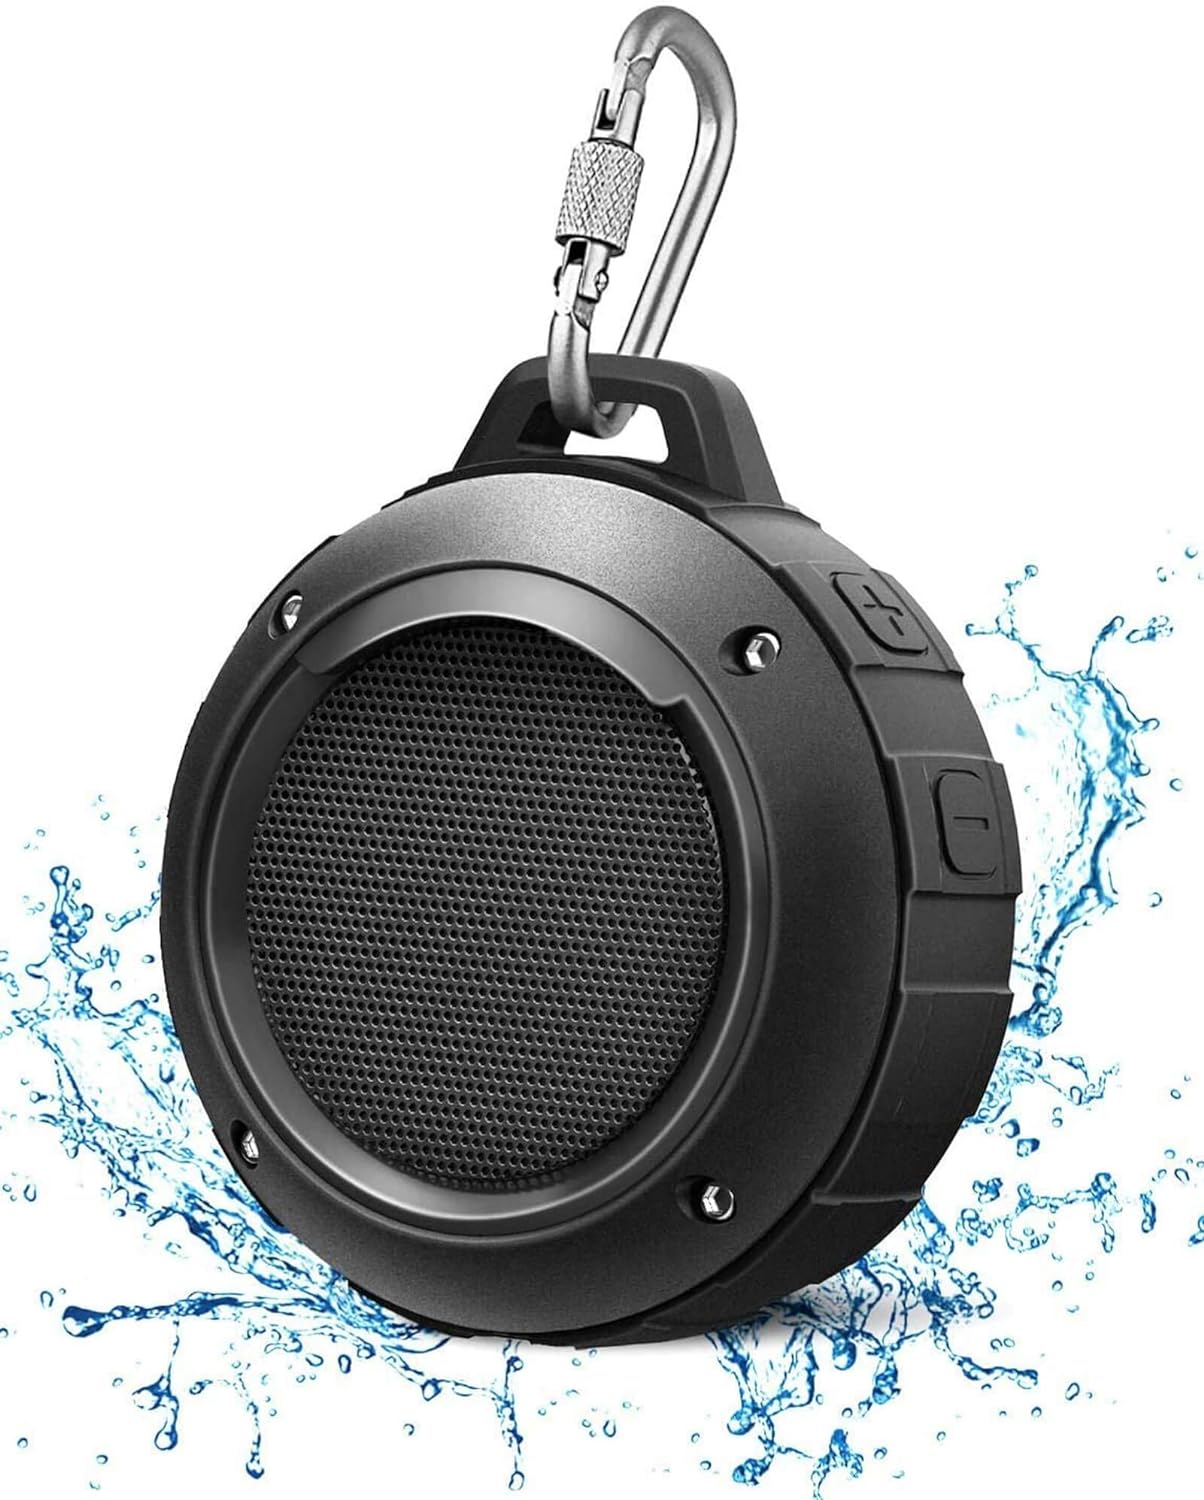 Kunodi Outdoor Waterproof Bluetooth Speaker, Wireless Portable Mini Shower Travel Speaker with Subwoofer, Enhanced Bass, Built in Mic for Sports, Pool, Beach, Hiking, Camping